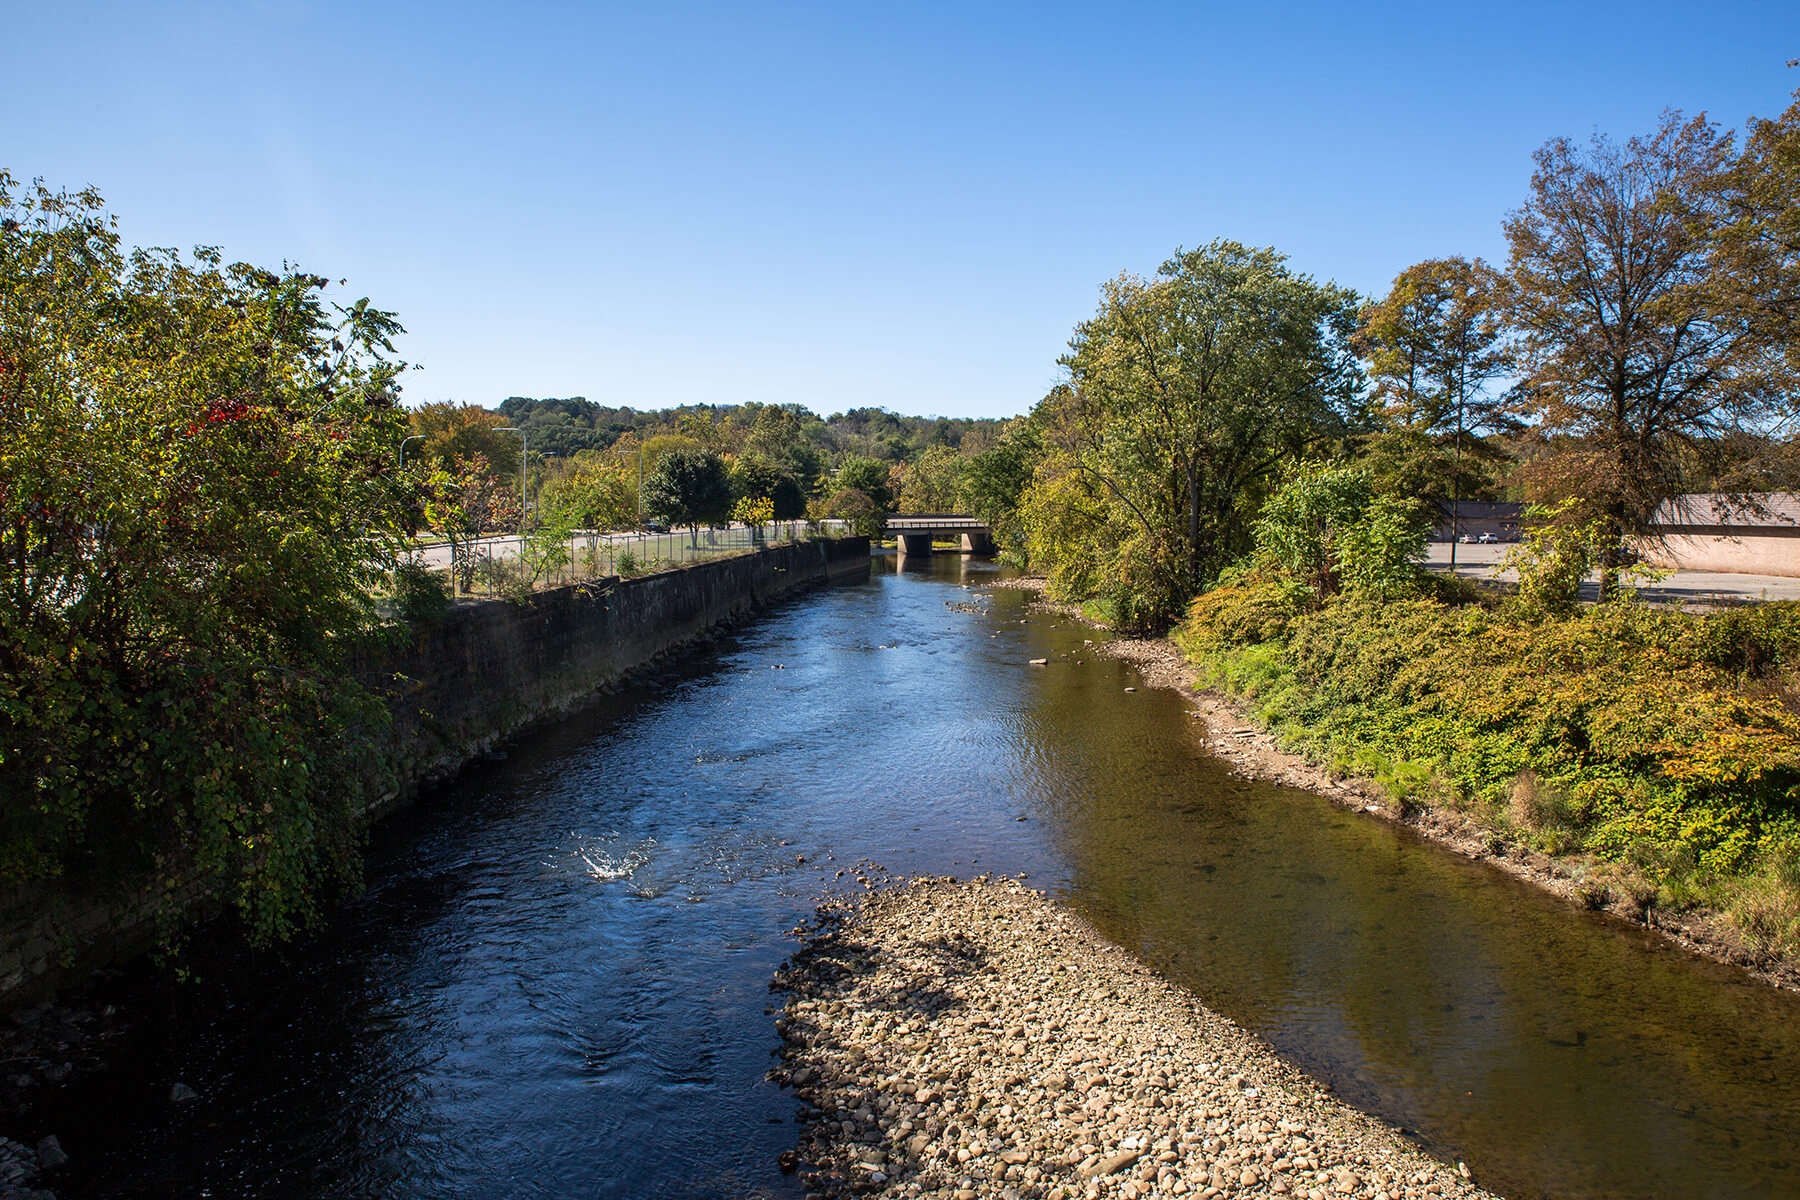 The Neshannock Creek from Jefferson Avenue in New Castle. This location is a popular fishing destination that particularly draws activity during trout season in the spring.